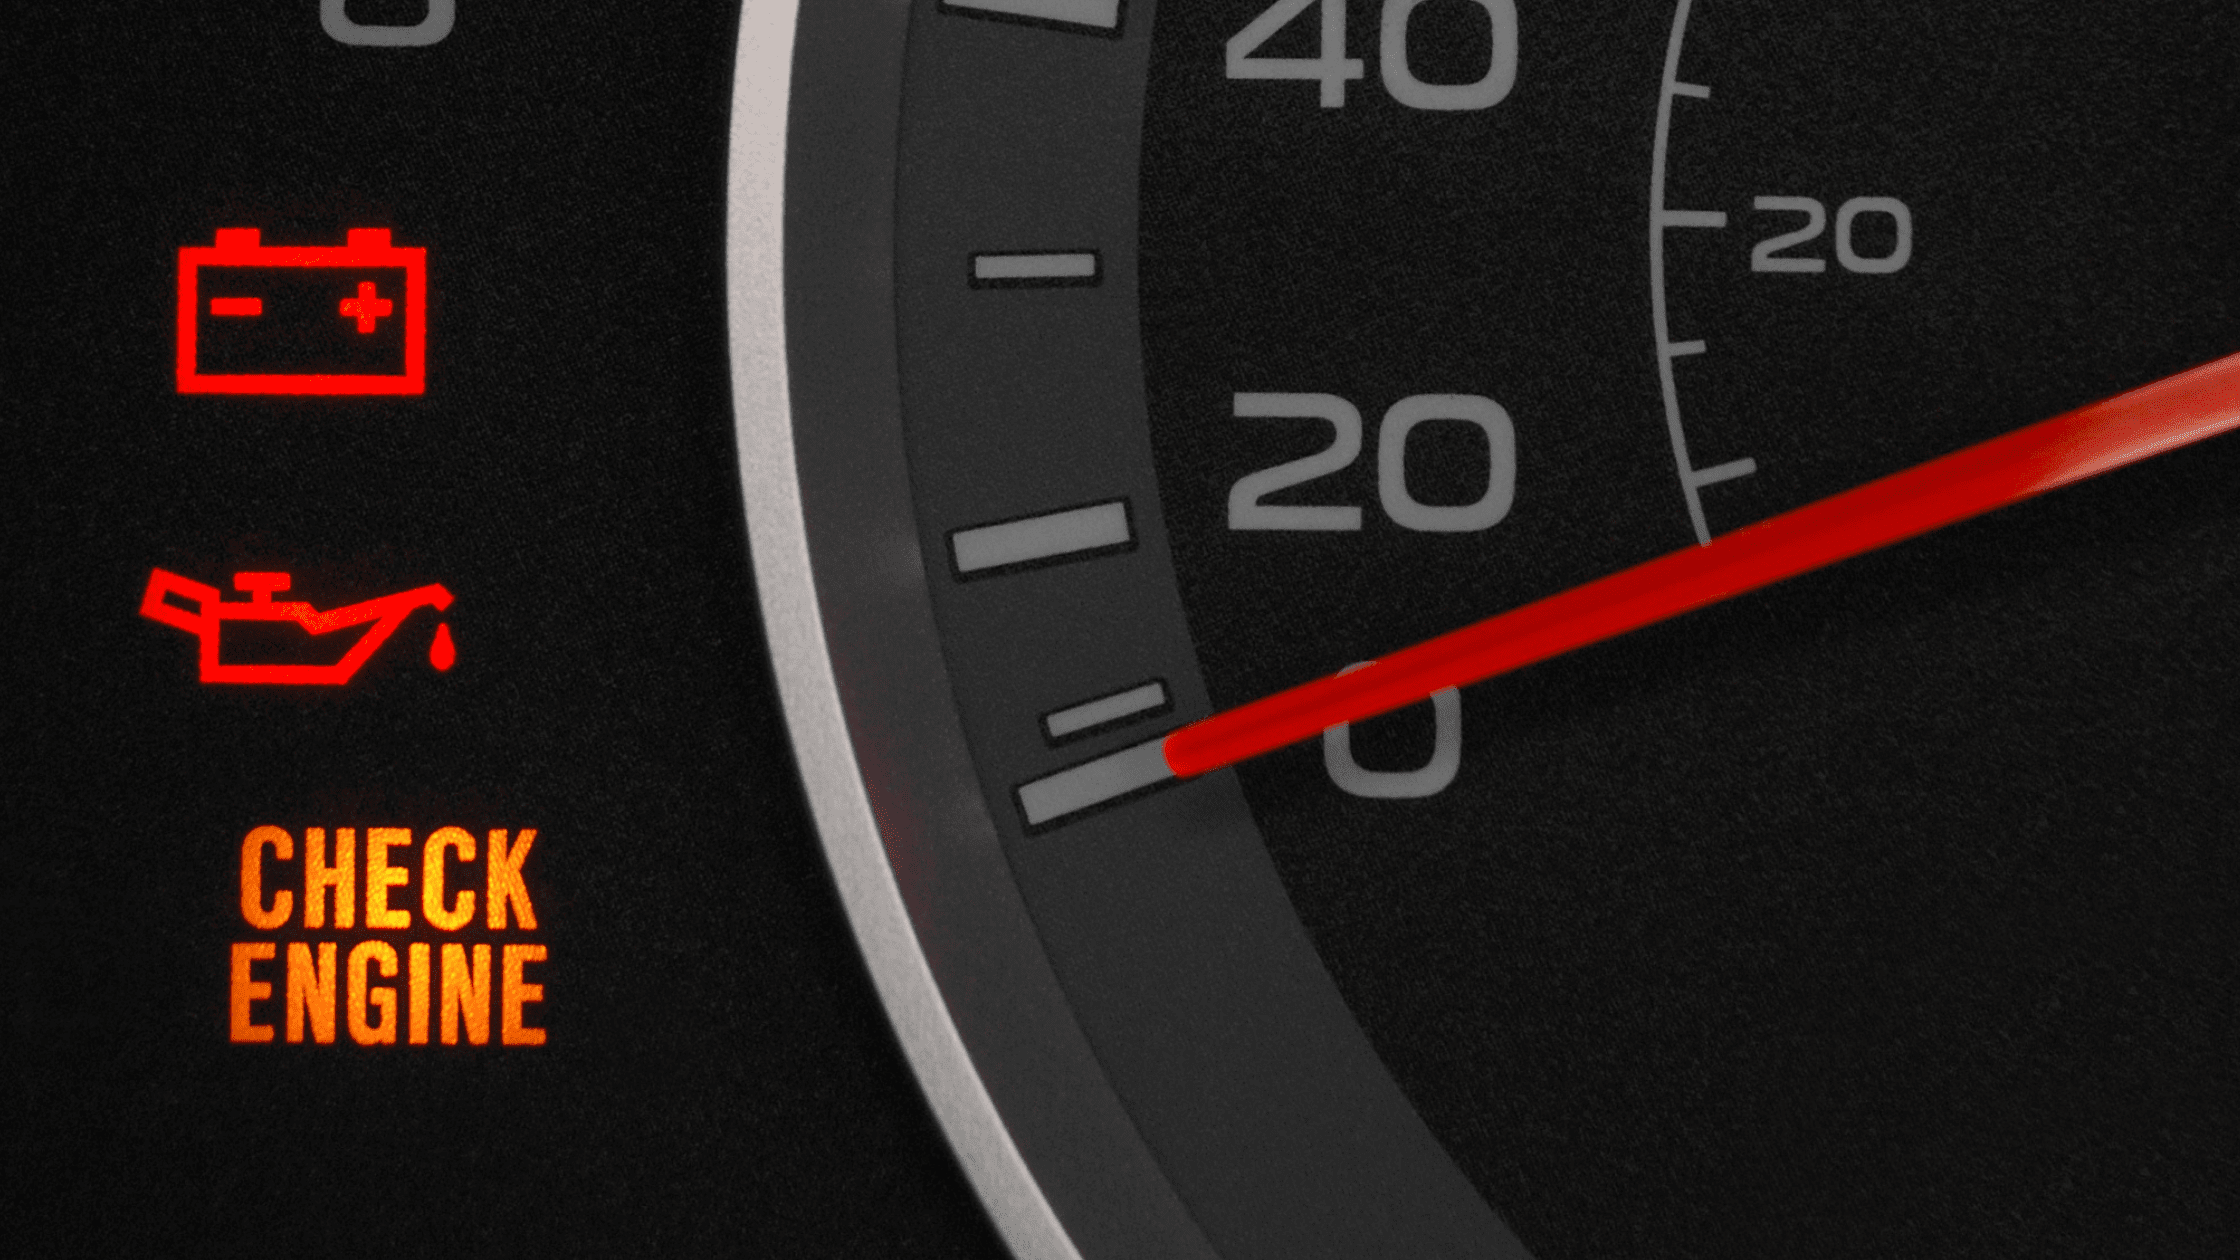 Close up image of an illuminated check engine light on a vehicle's dashboard